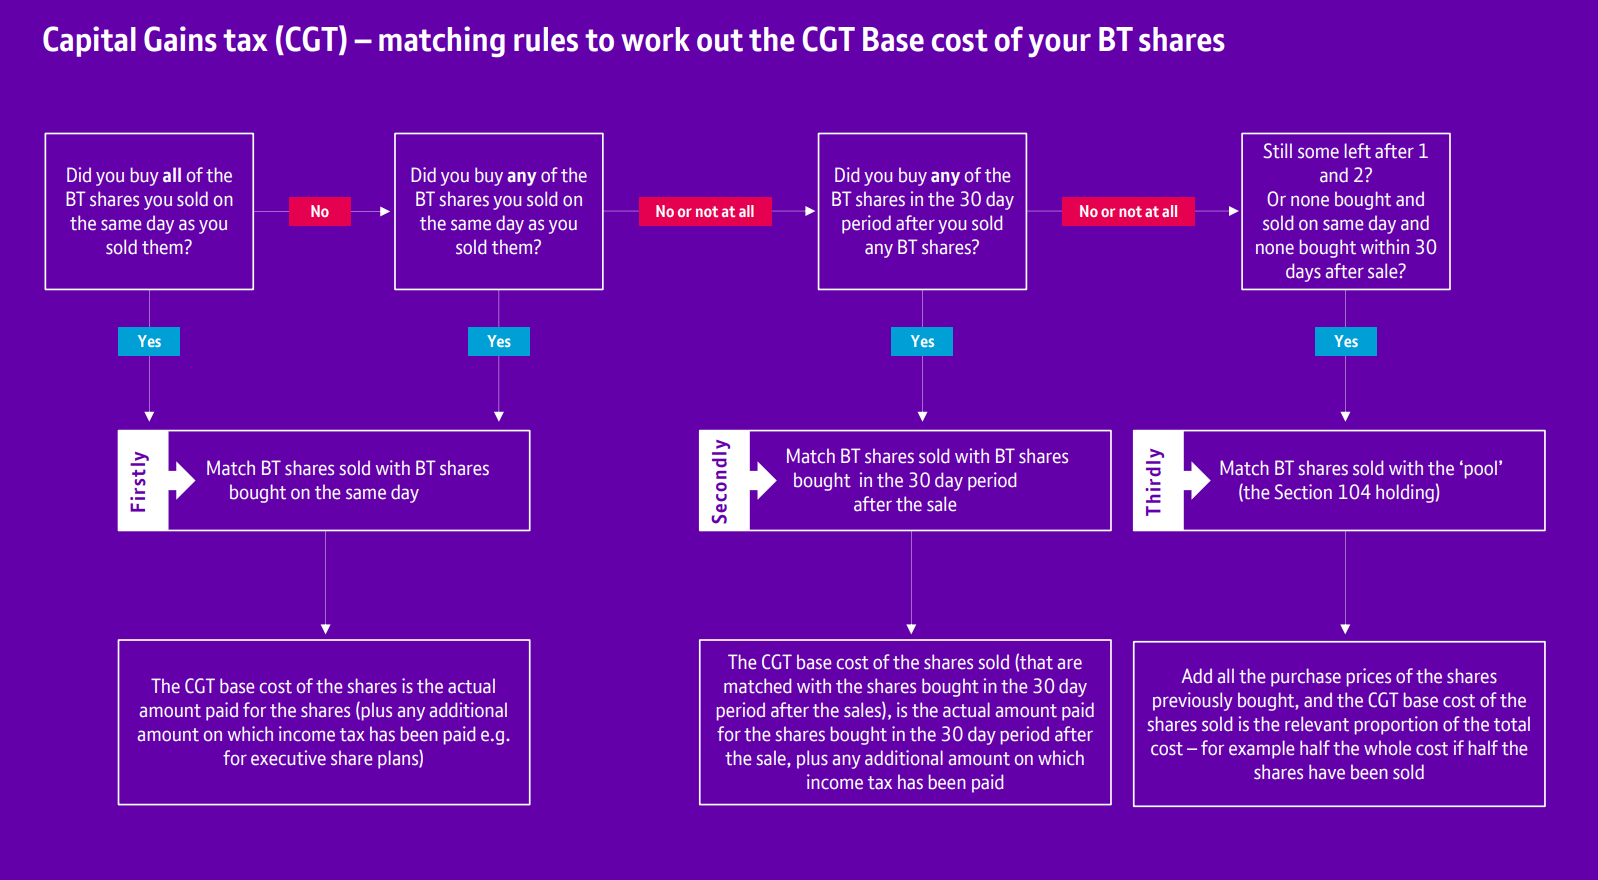 Matching rules to work out the CGT base cost of your BT shares